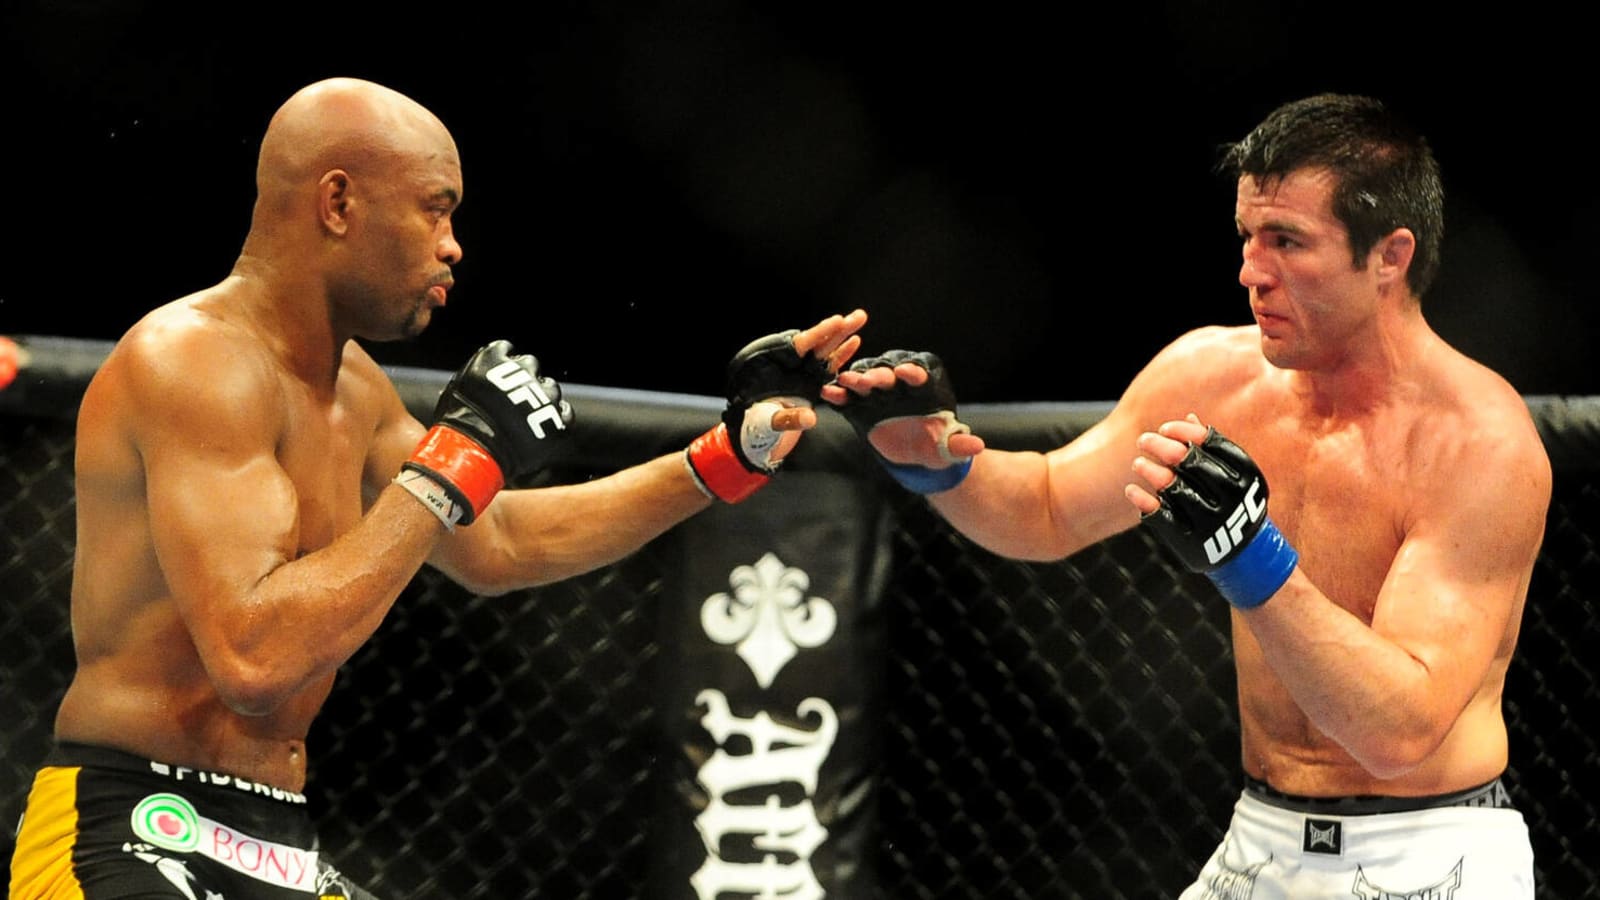 Silva, Sonnen will finish off their trilogy in a boxing ring